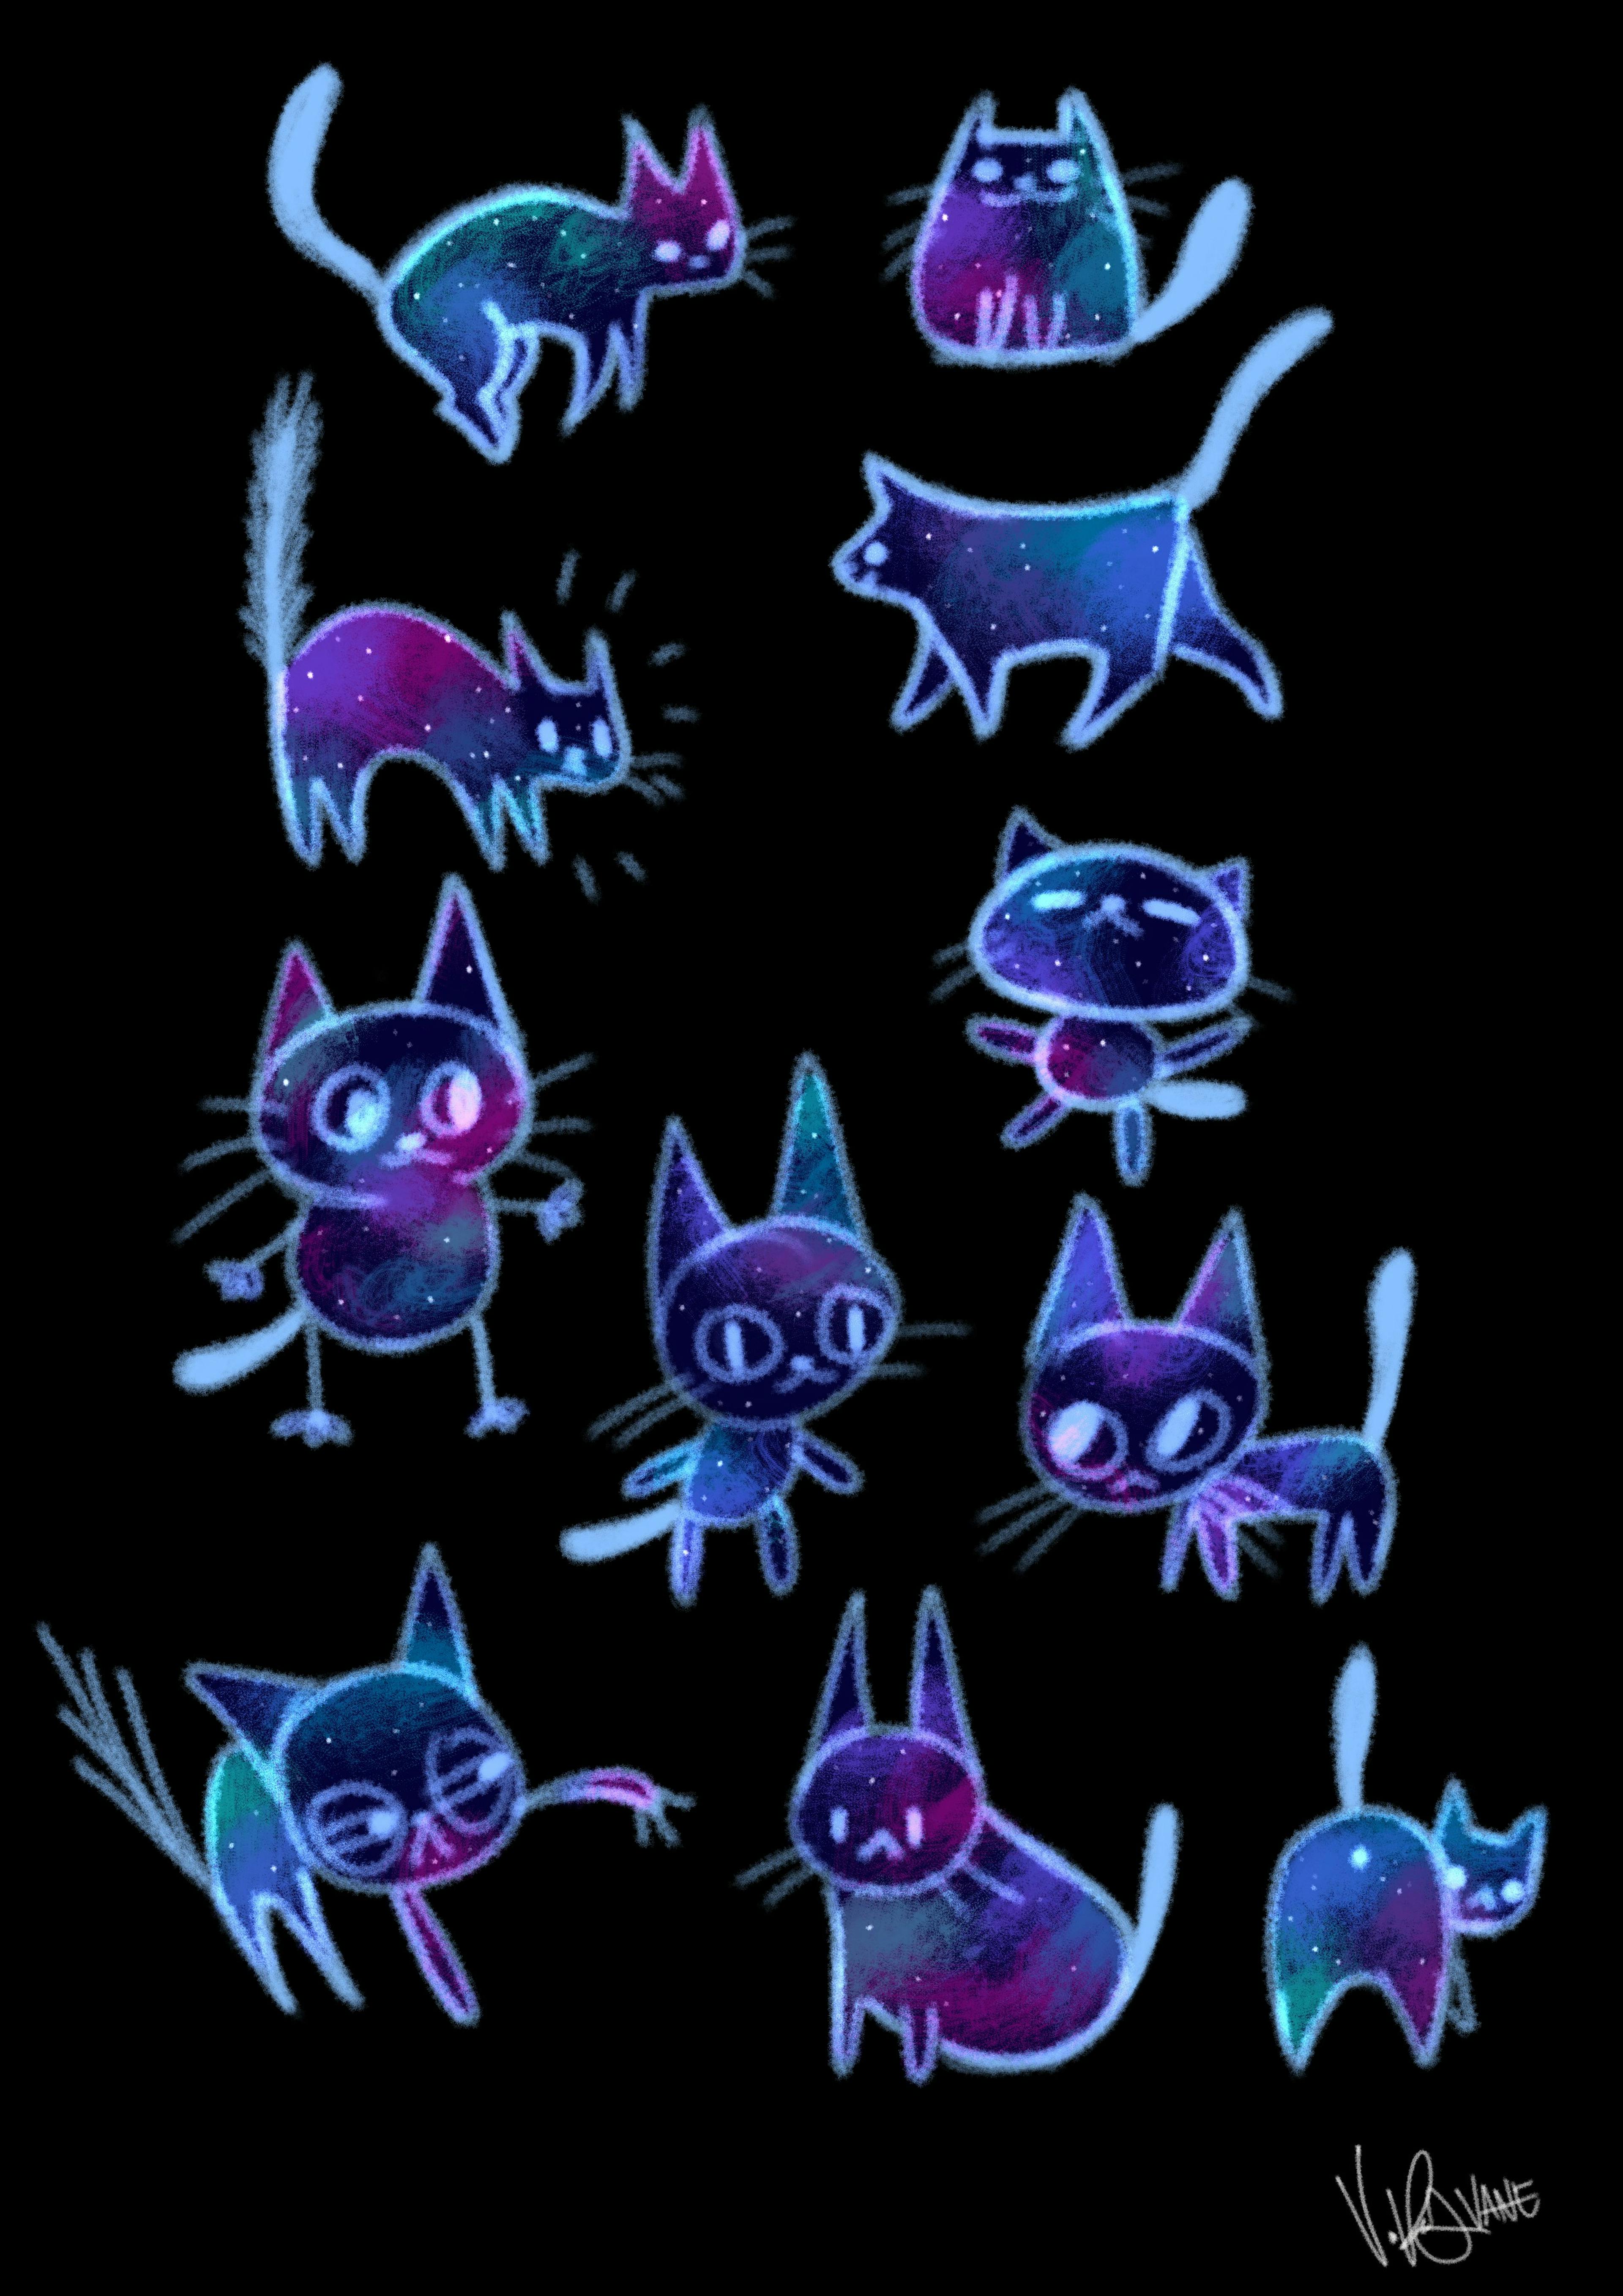 Cat sketches made of stars